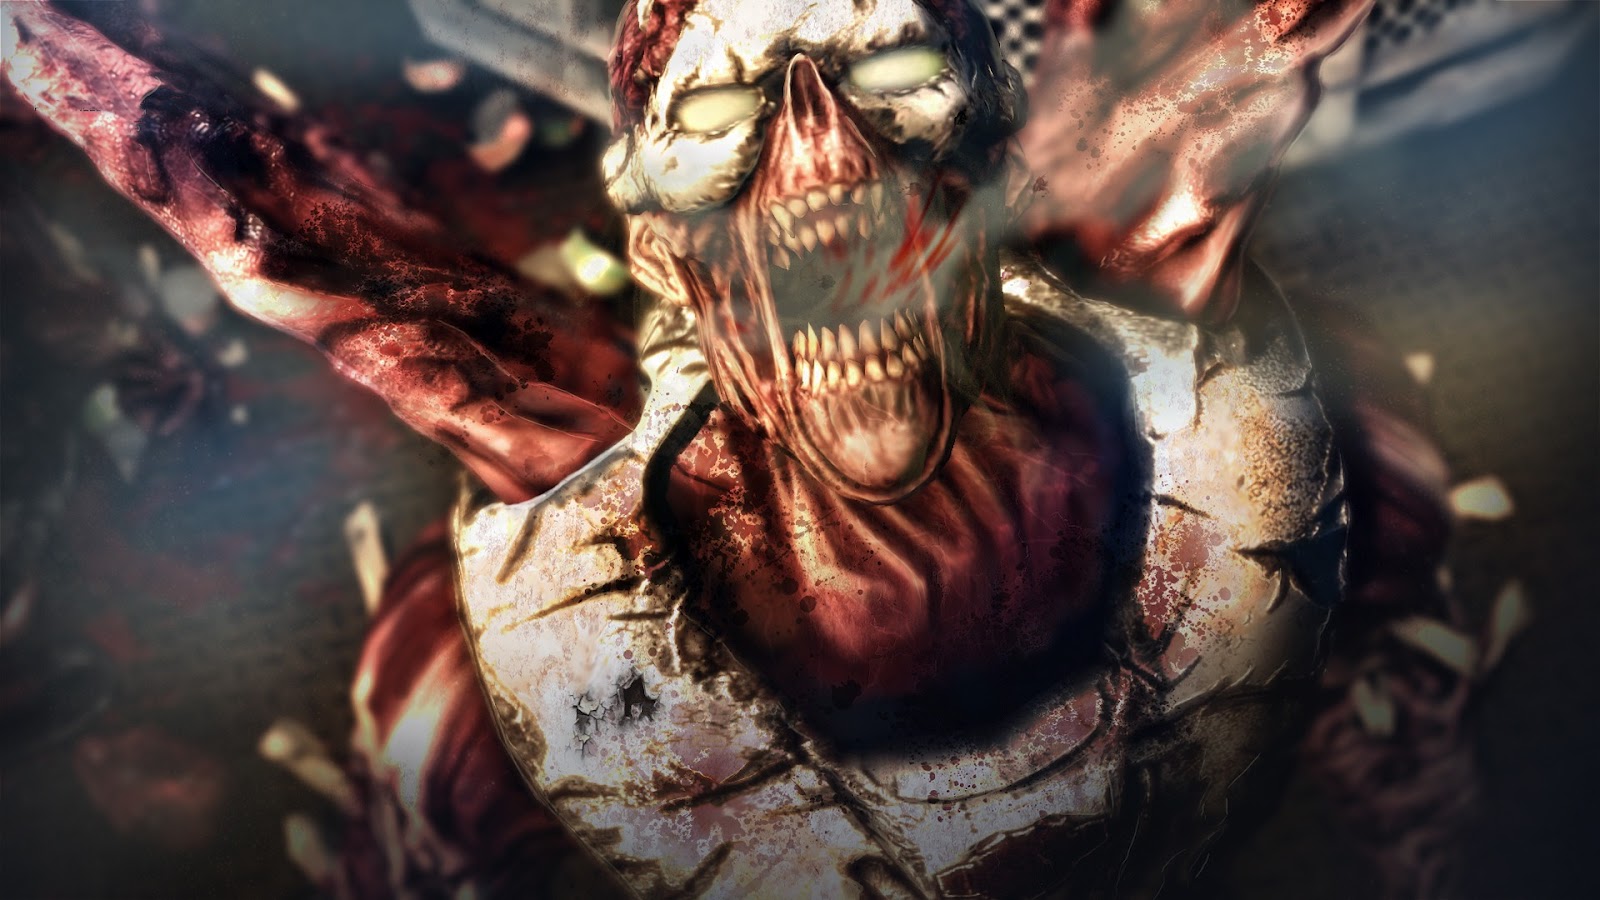 Afterfall Insanity Game Wallpaper And Theme For Windows Extreme